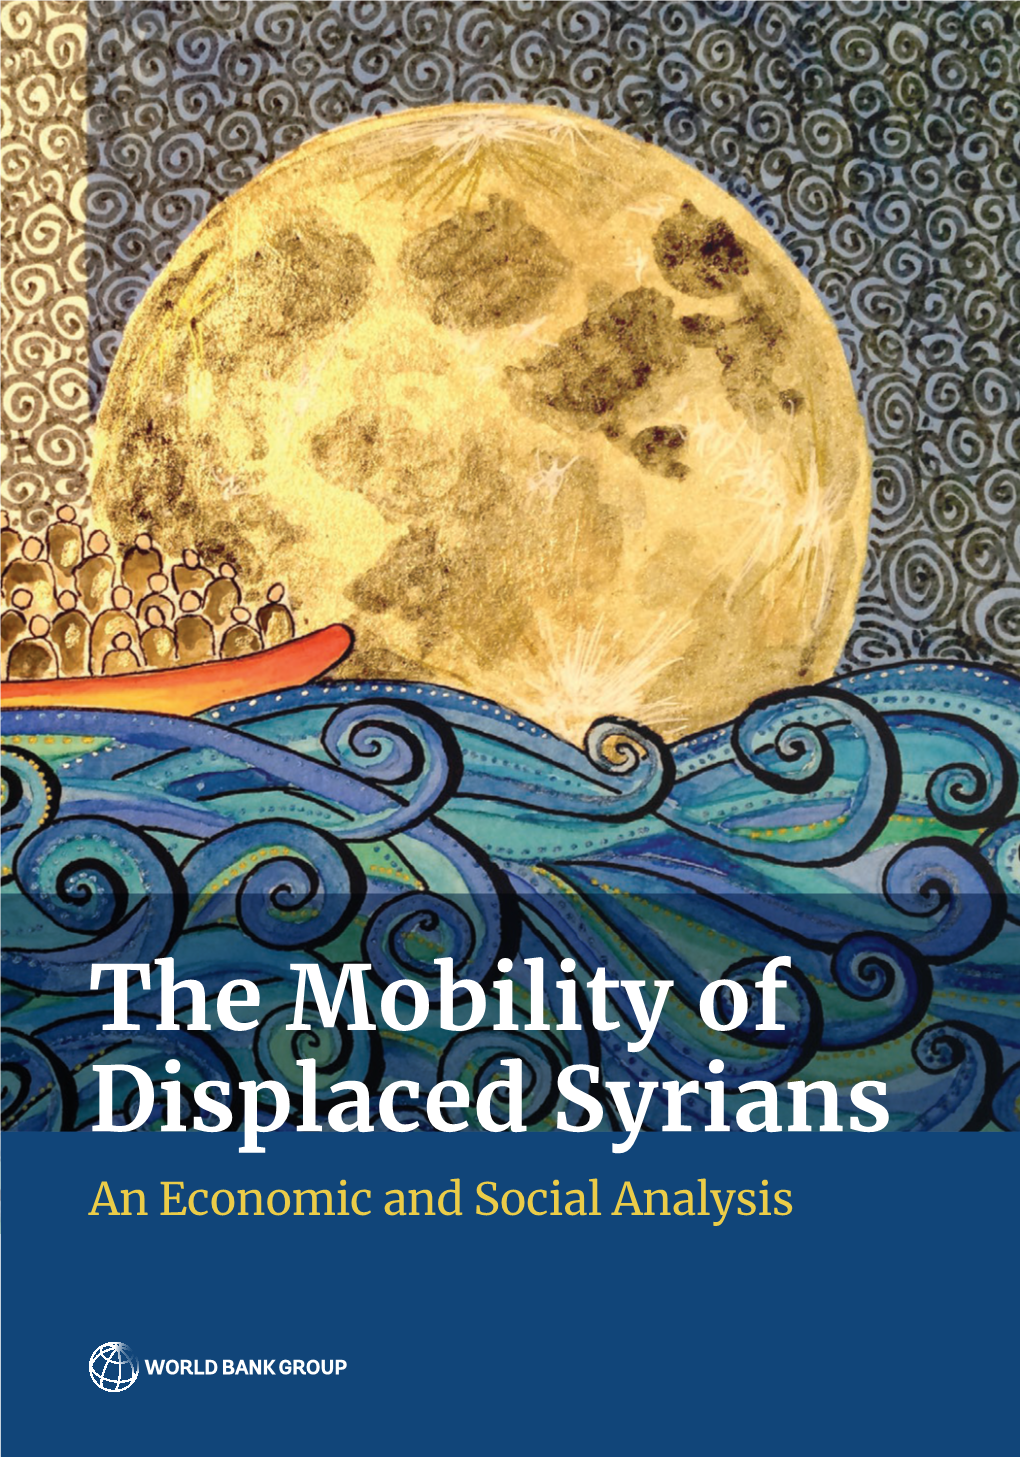 The Mobility of Displaced Syrians: an Economic and Social Analysis